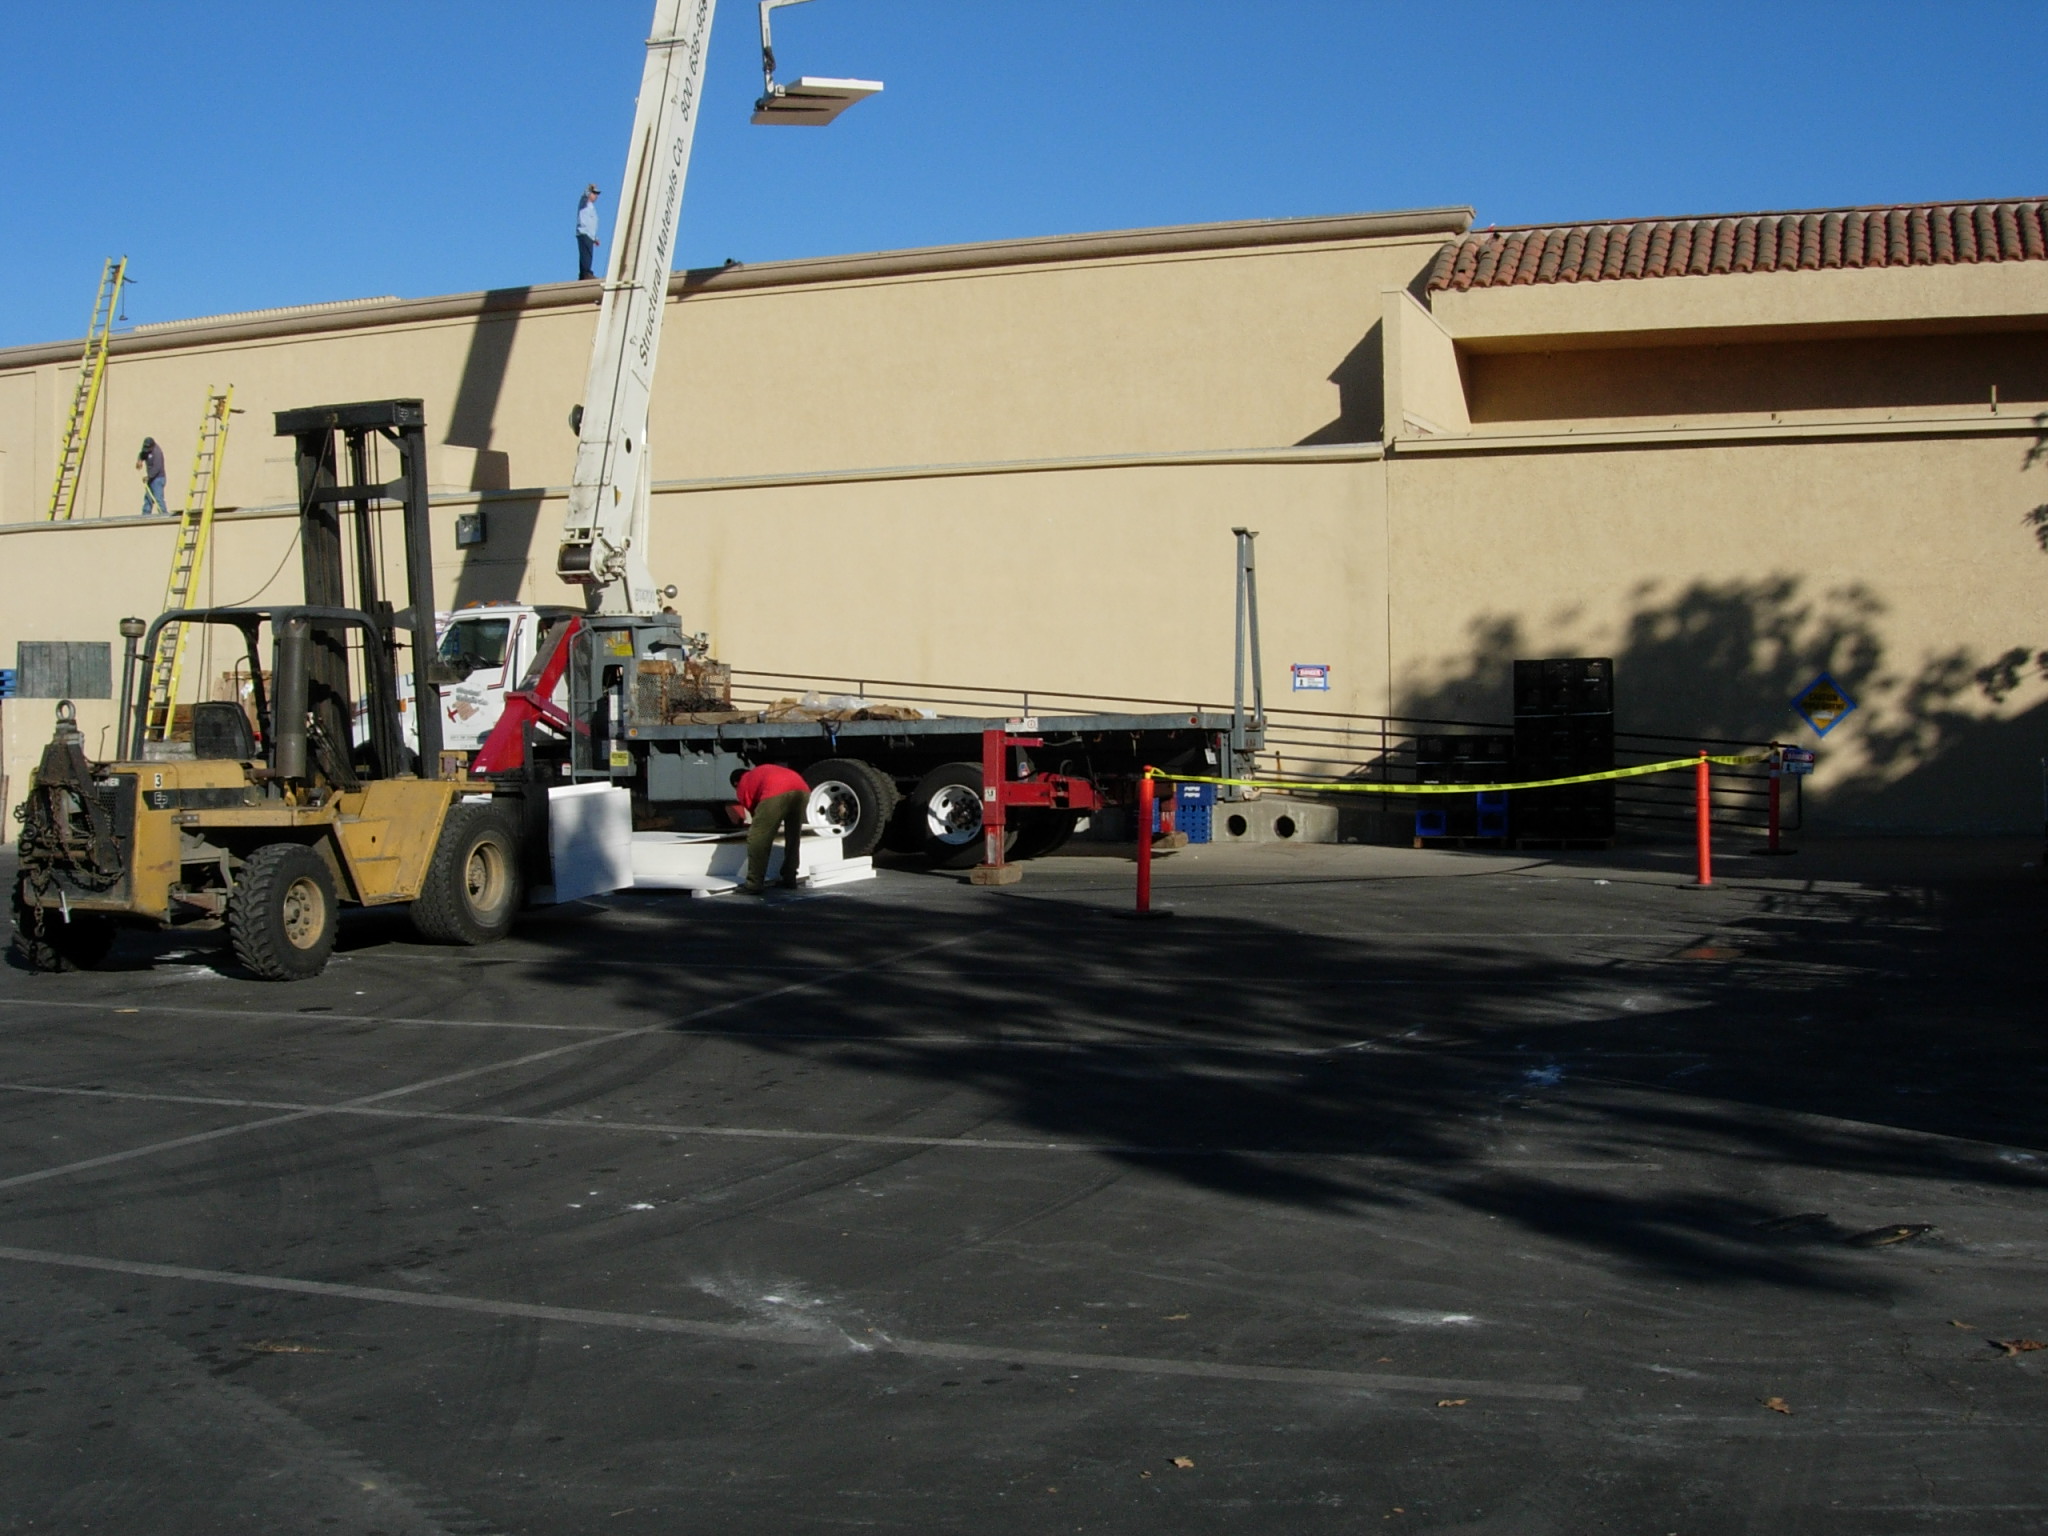 Roof_Loading_Tpo | FC and Sons Roofing Protfolio | Commercial and Industrial Roofing in California | Commercial and Industrial Roofing in Nevada | Commercial and Industrial Roofing in Arizona